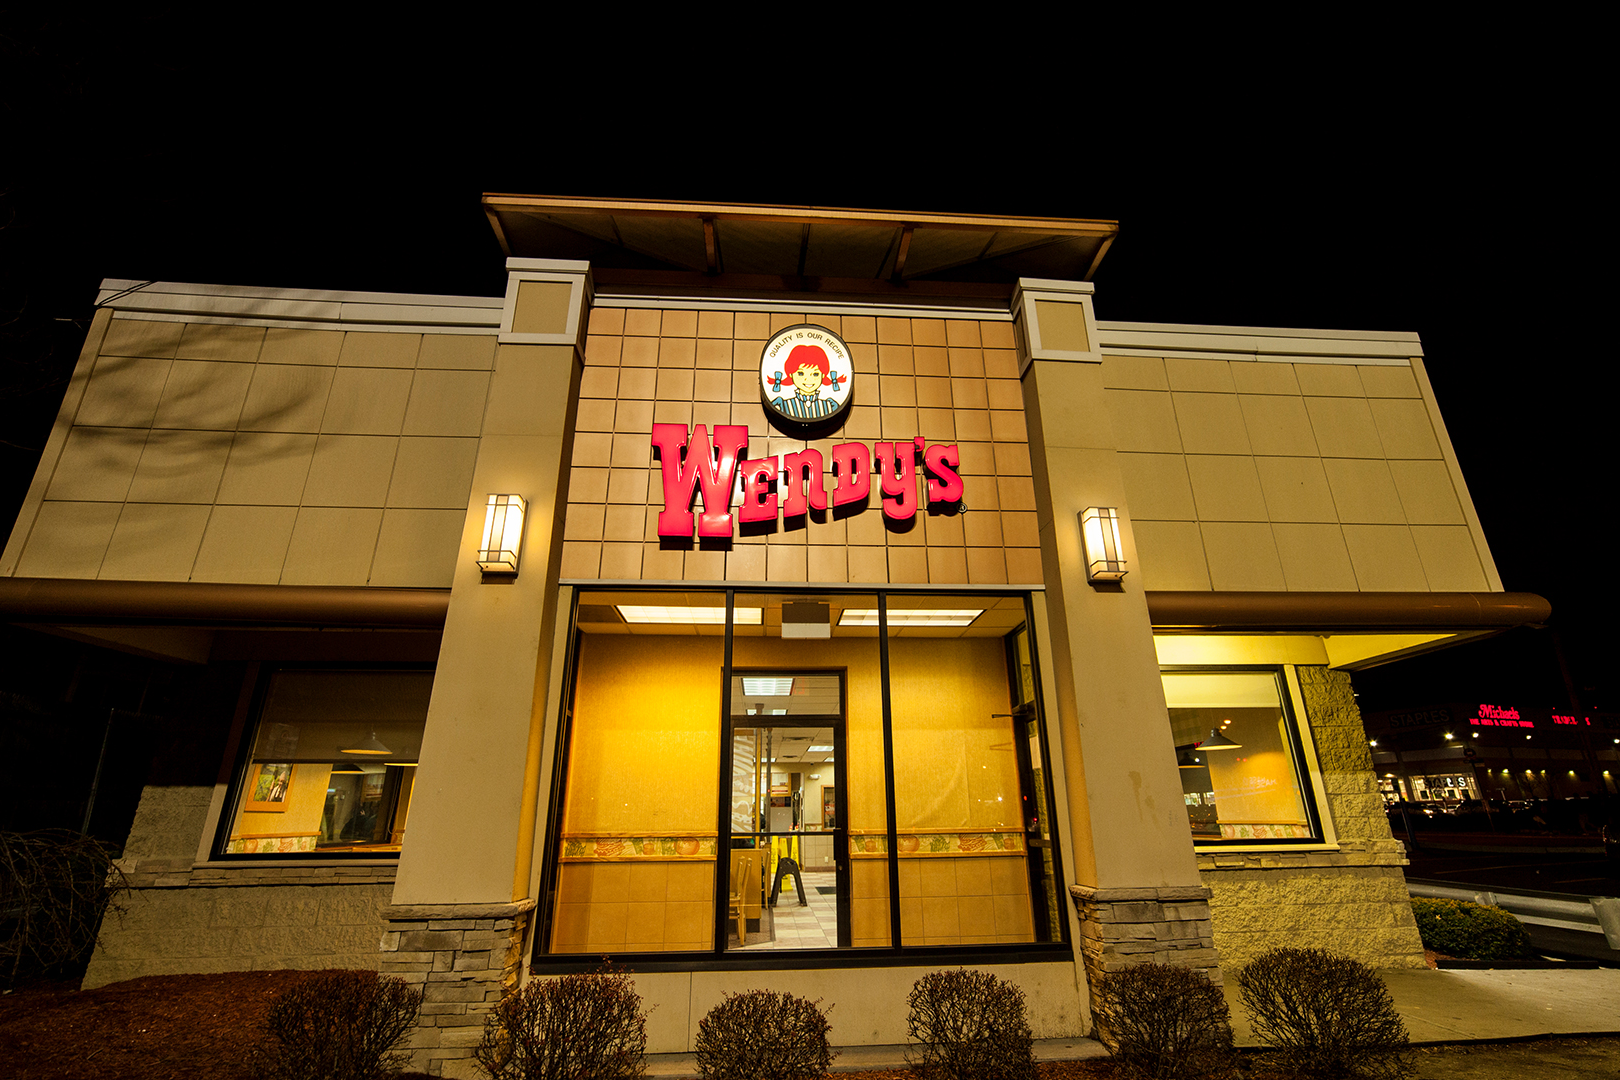 Wendys Restaurant Manager Caught Stealing from Safe.